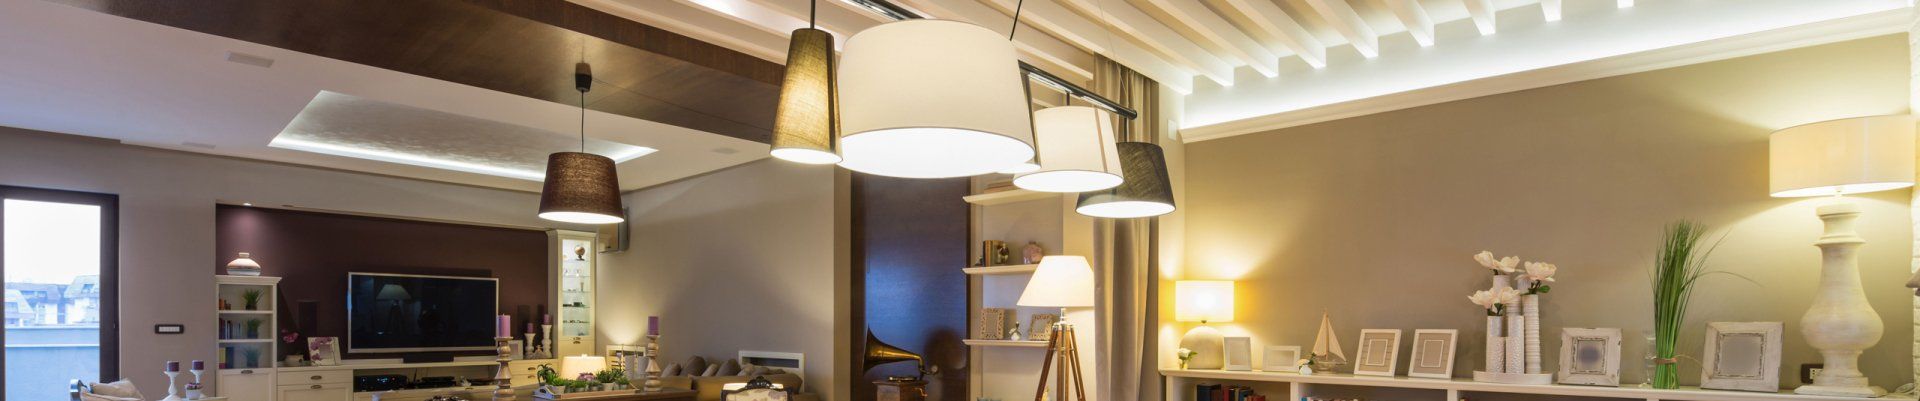 Hanging lights, floor lamp and table lamp